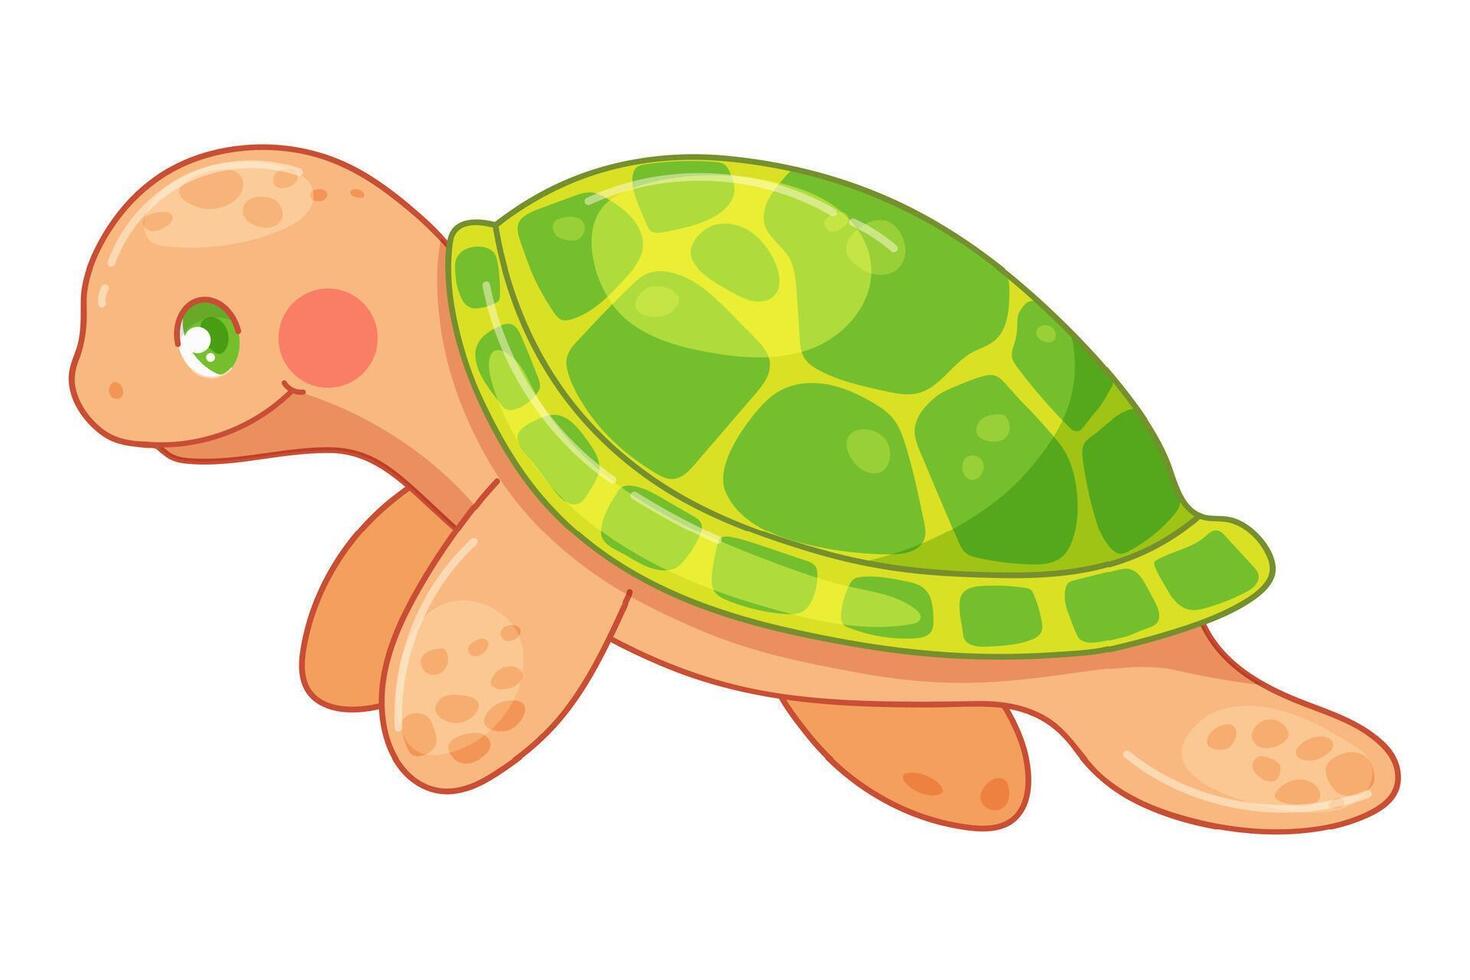 Cute baby turtle on white background isolated. Vector illustration of sea life in childish style for prints, textiles, clothes, baby shower